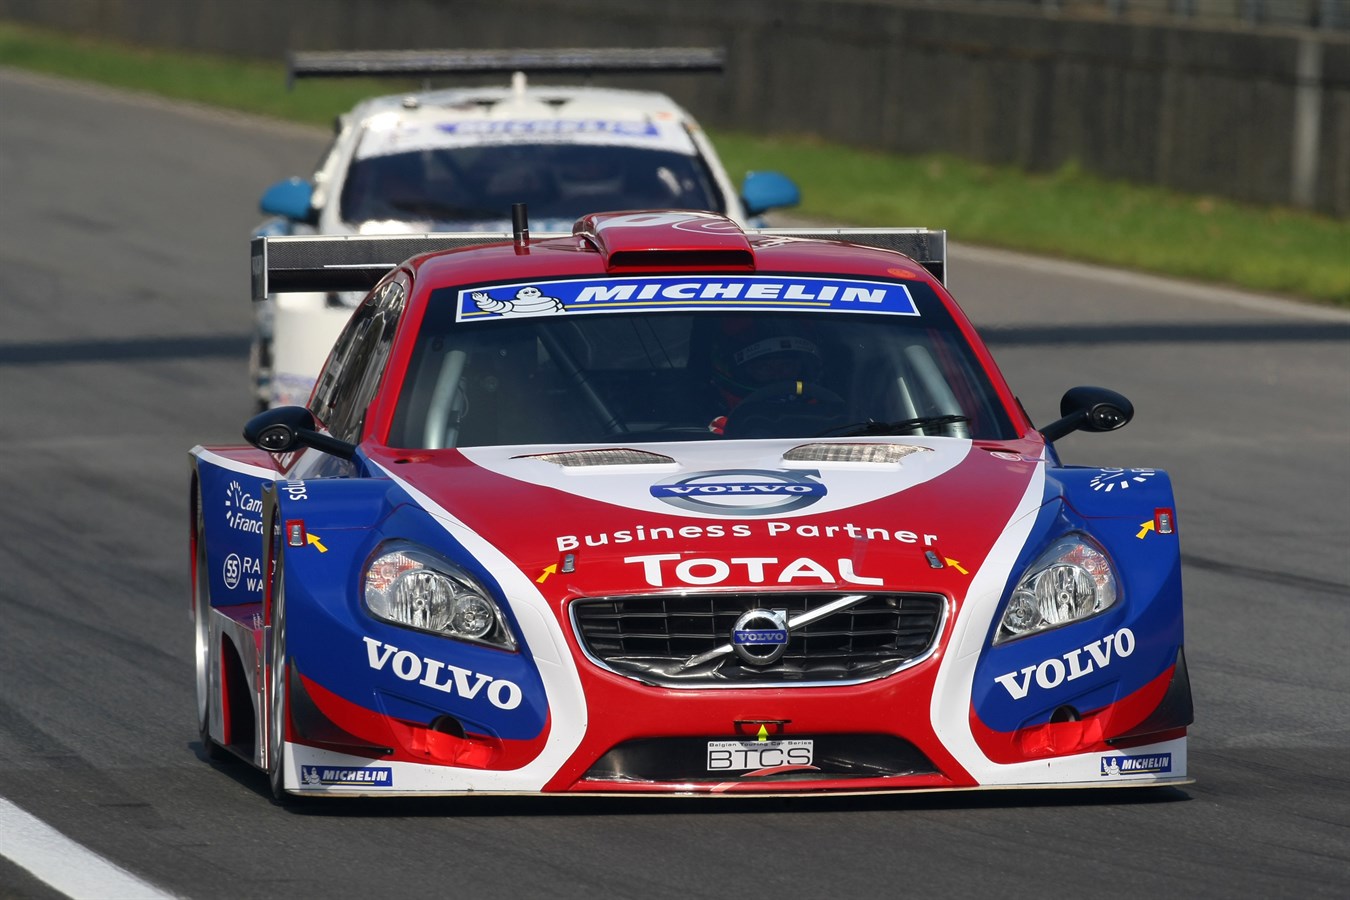 The Volvo S60 in the Belgian Touring Car Series 2010 (BTCS) (front)